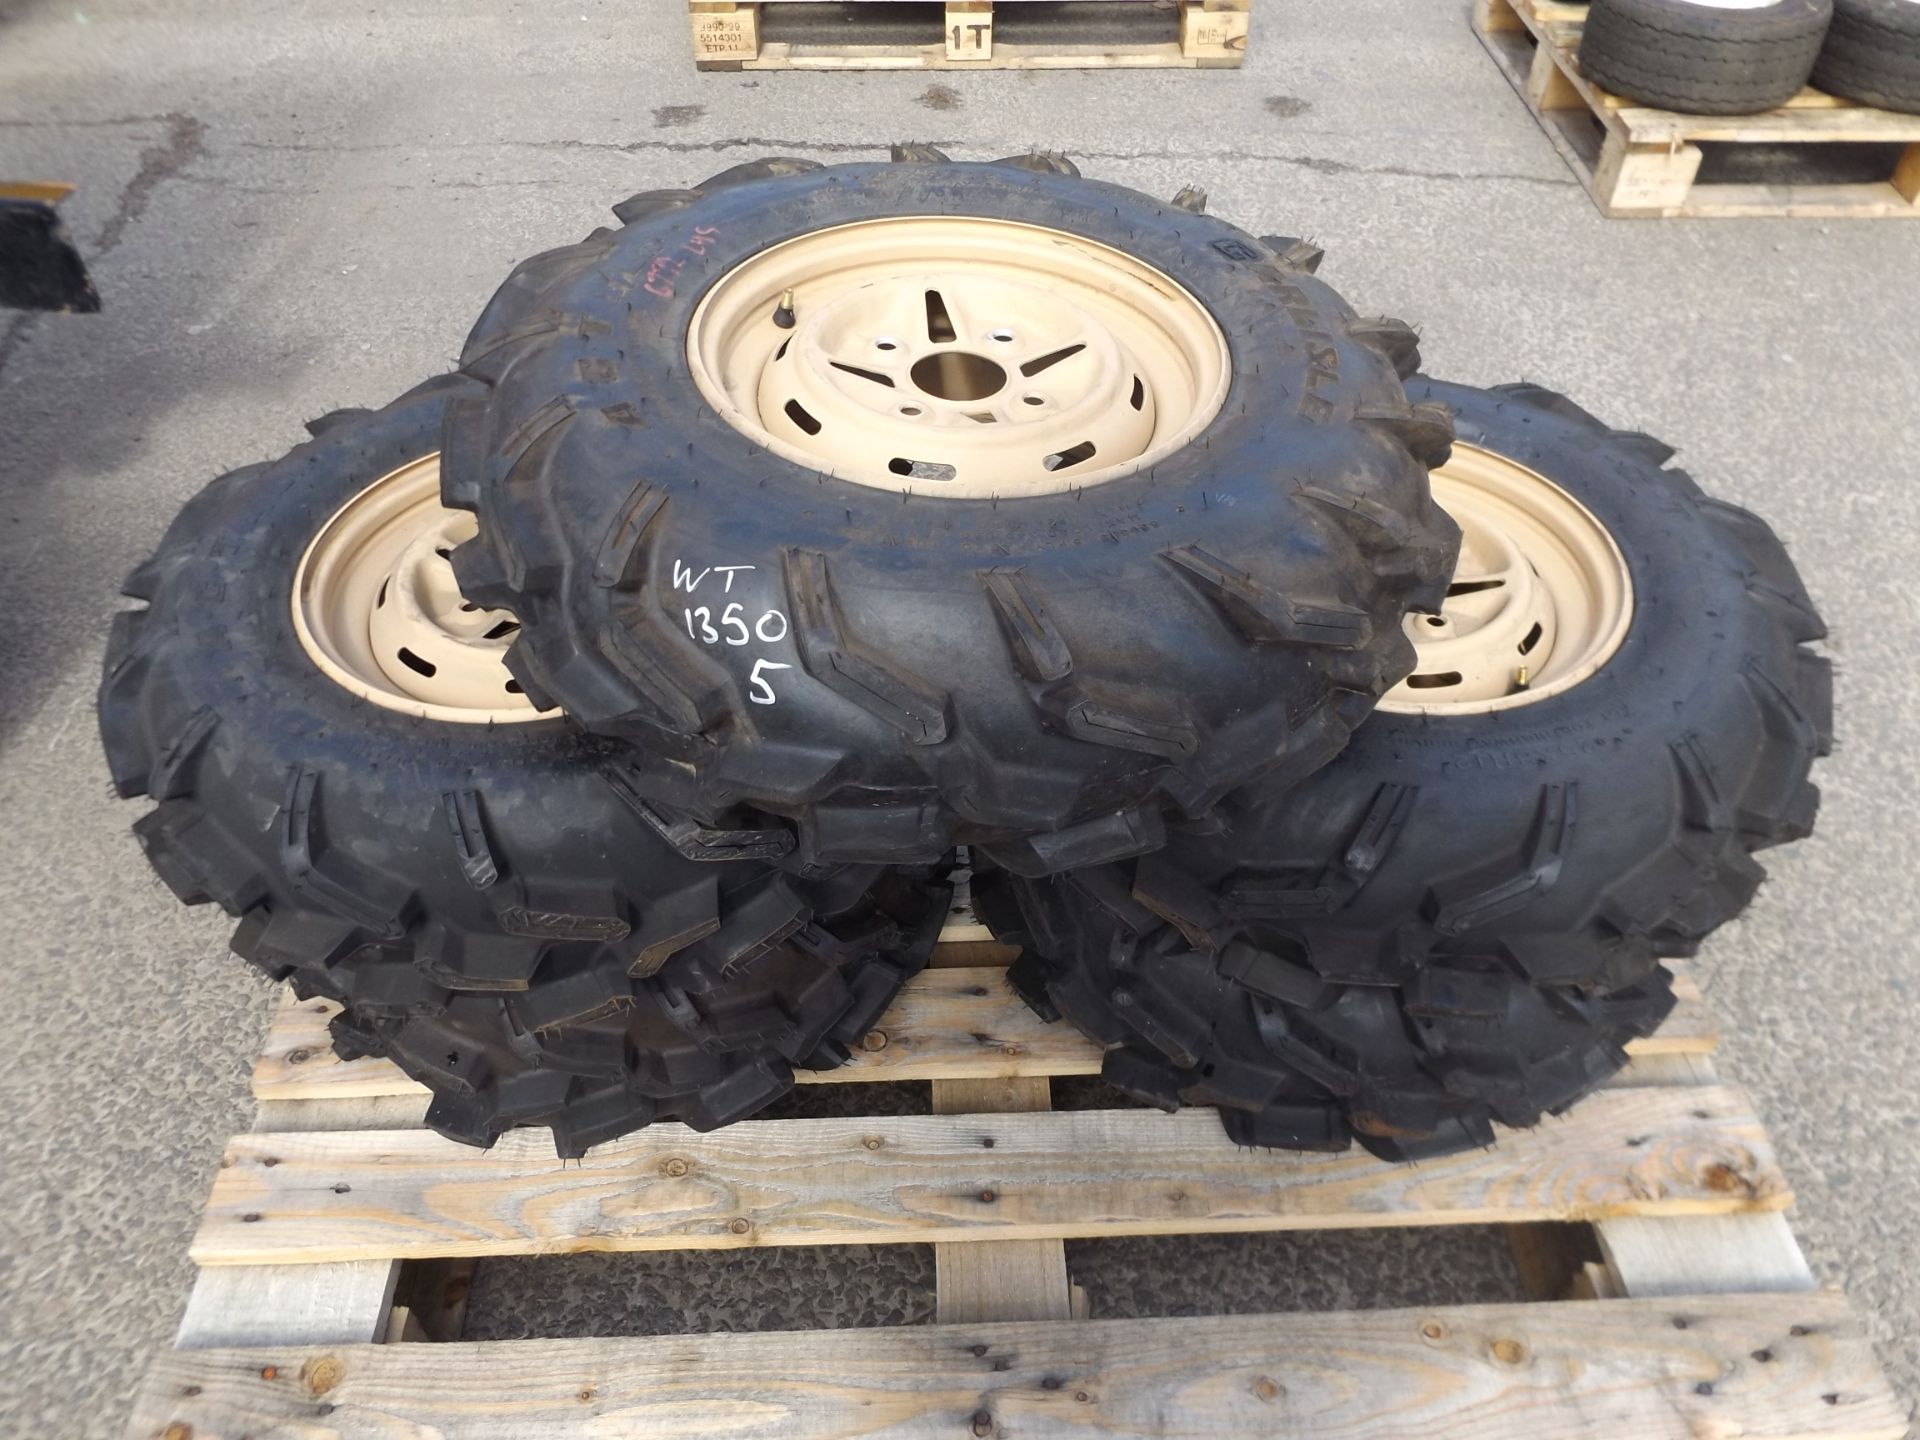 5 x Carlisle ACT 25x8R12 ATV Tyres complete with rims